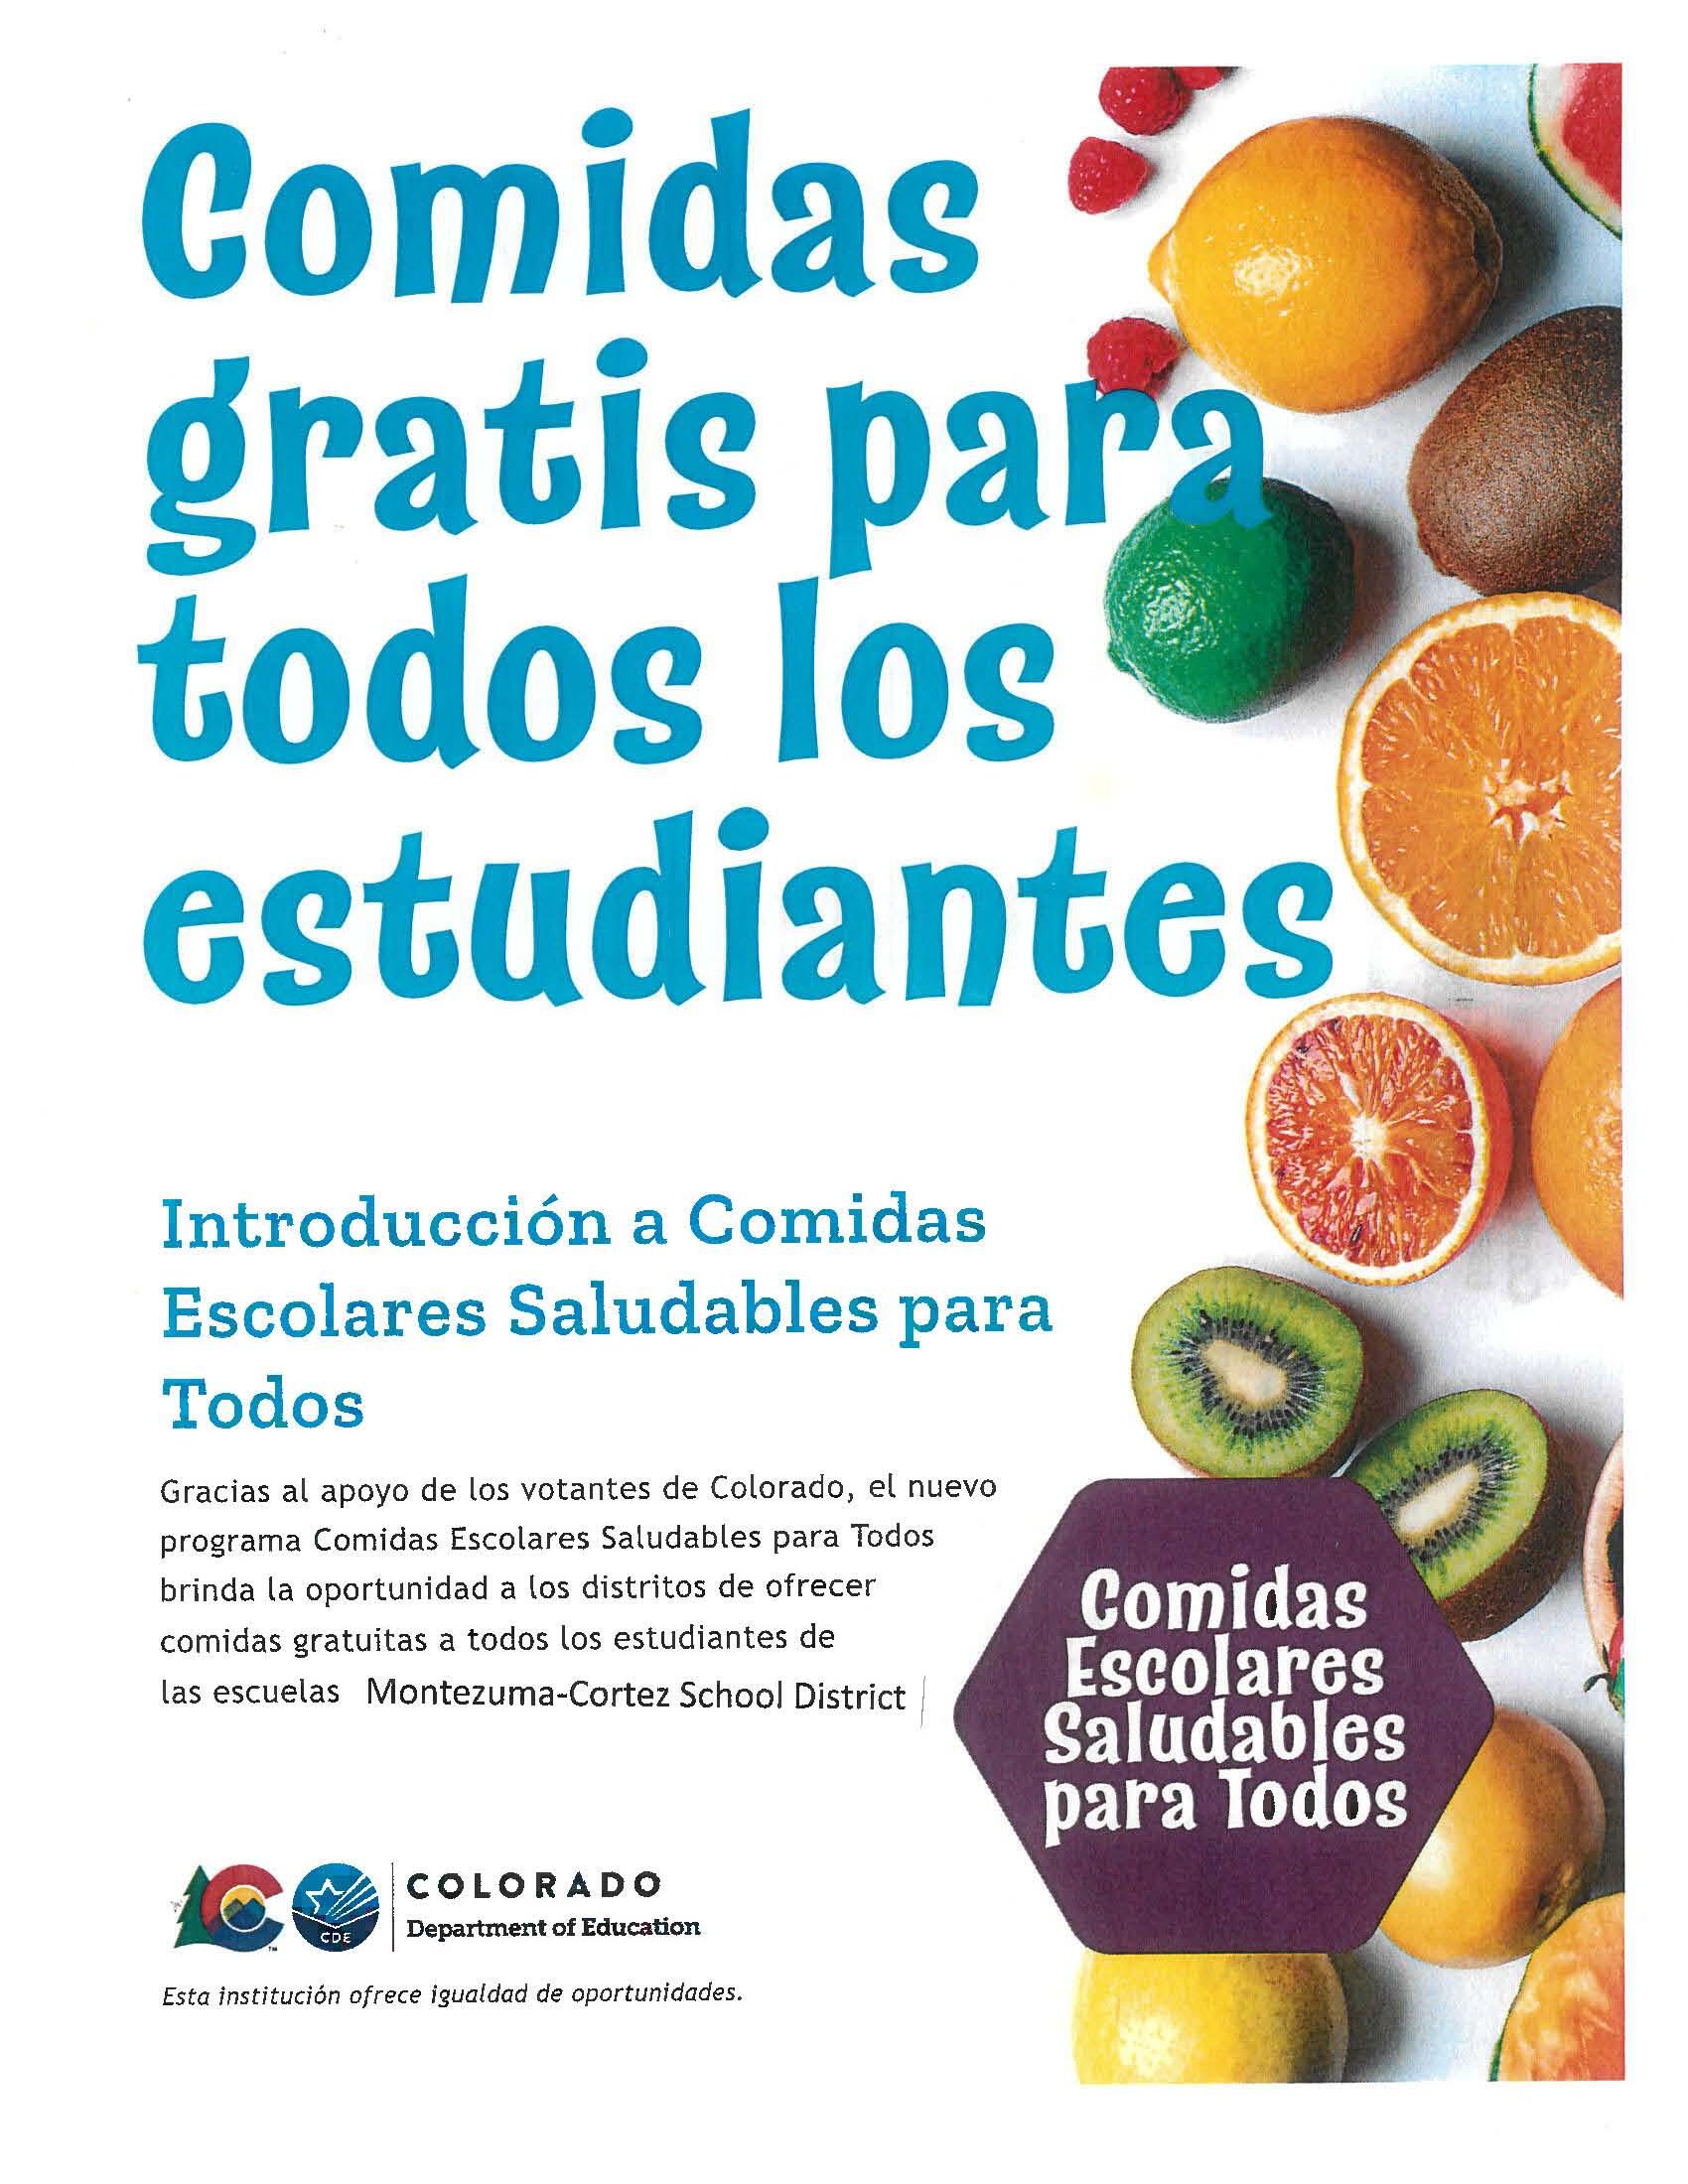 Explanation of why meals are no longer free (in Spanish)